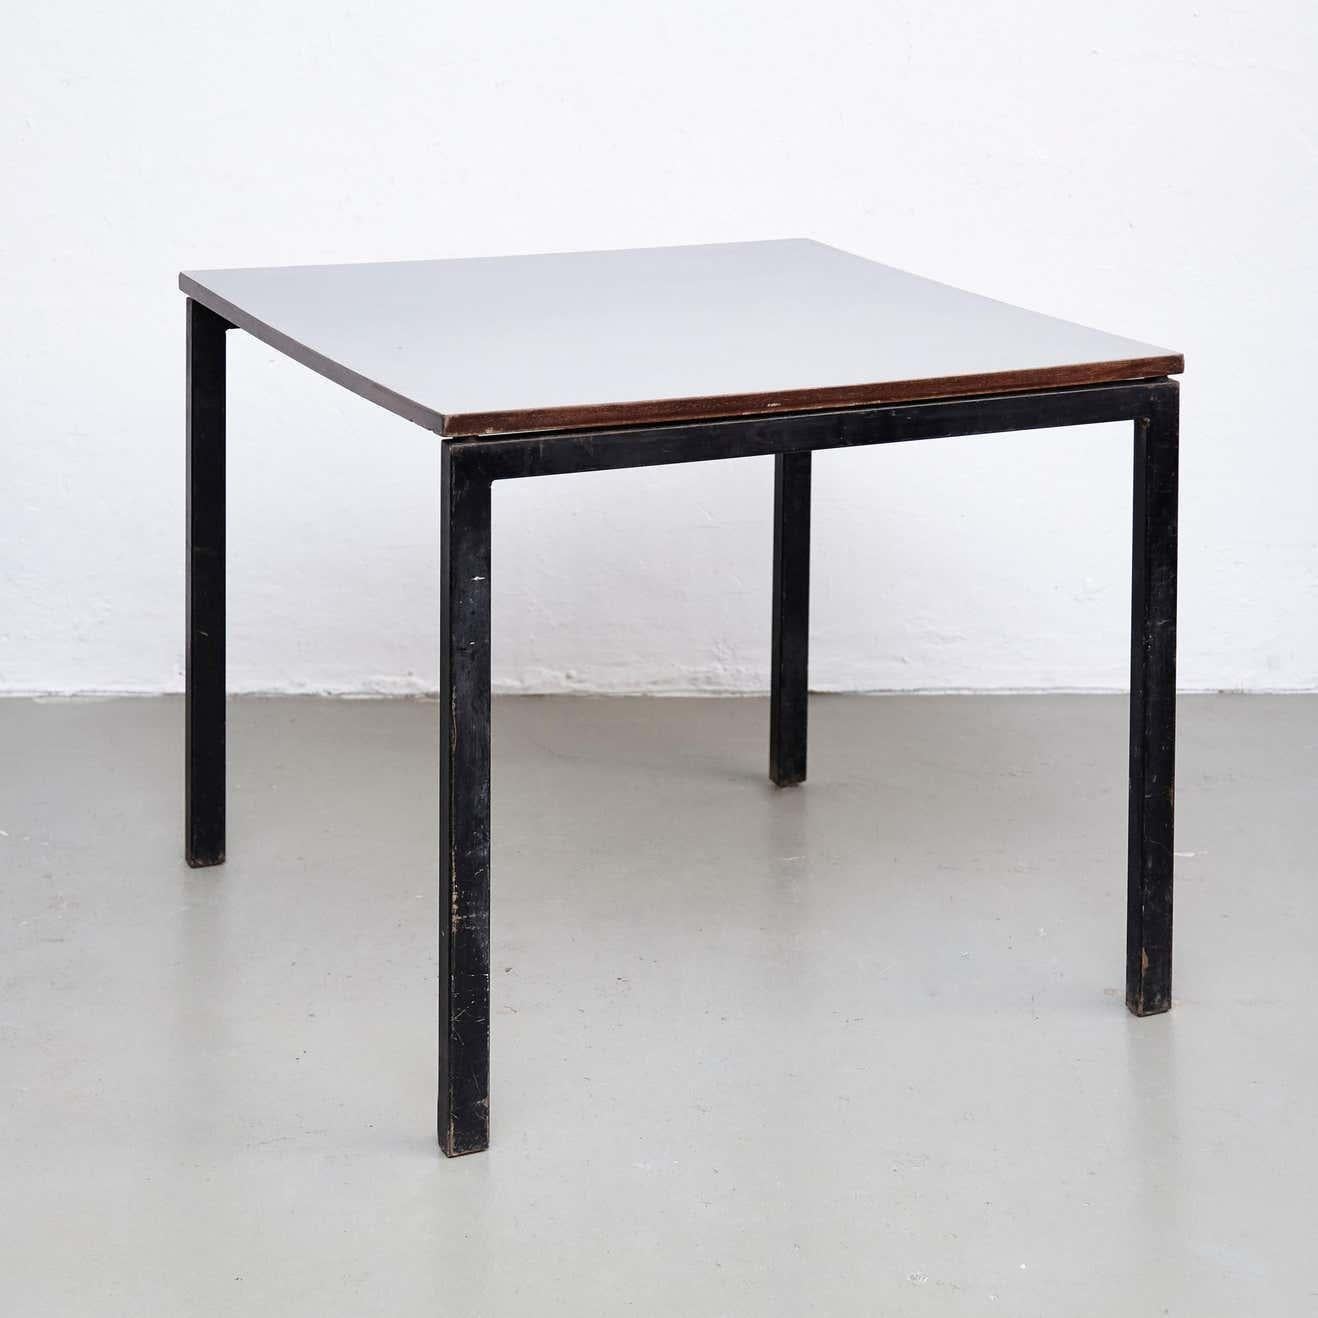 Mid-20th Century Charlotte Perriand, Mid-Century Modern, Wood Formica and Metal Table, circa 1950 For Sale